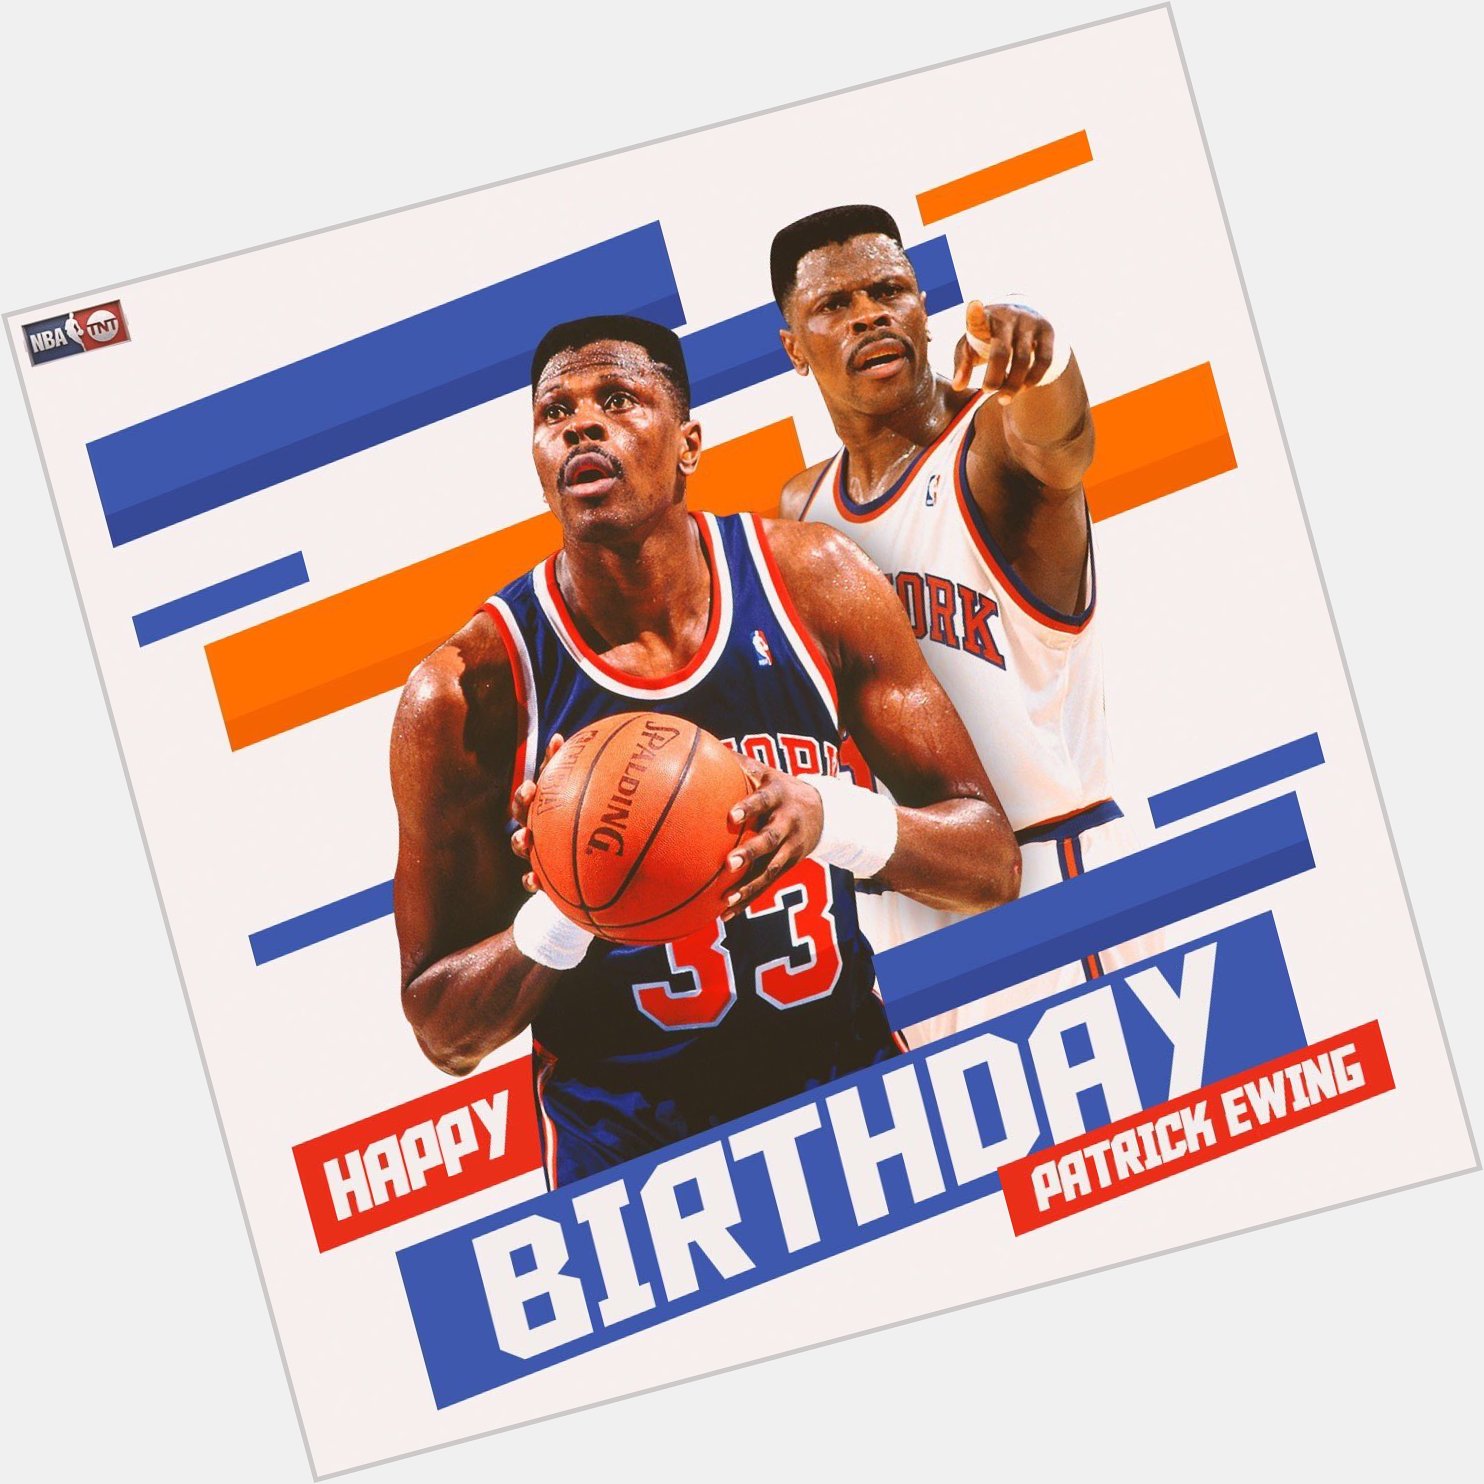 11x NBA All-Star 
Hall of Fame

Happy 55th Birthday to Patrick Ewing!   